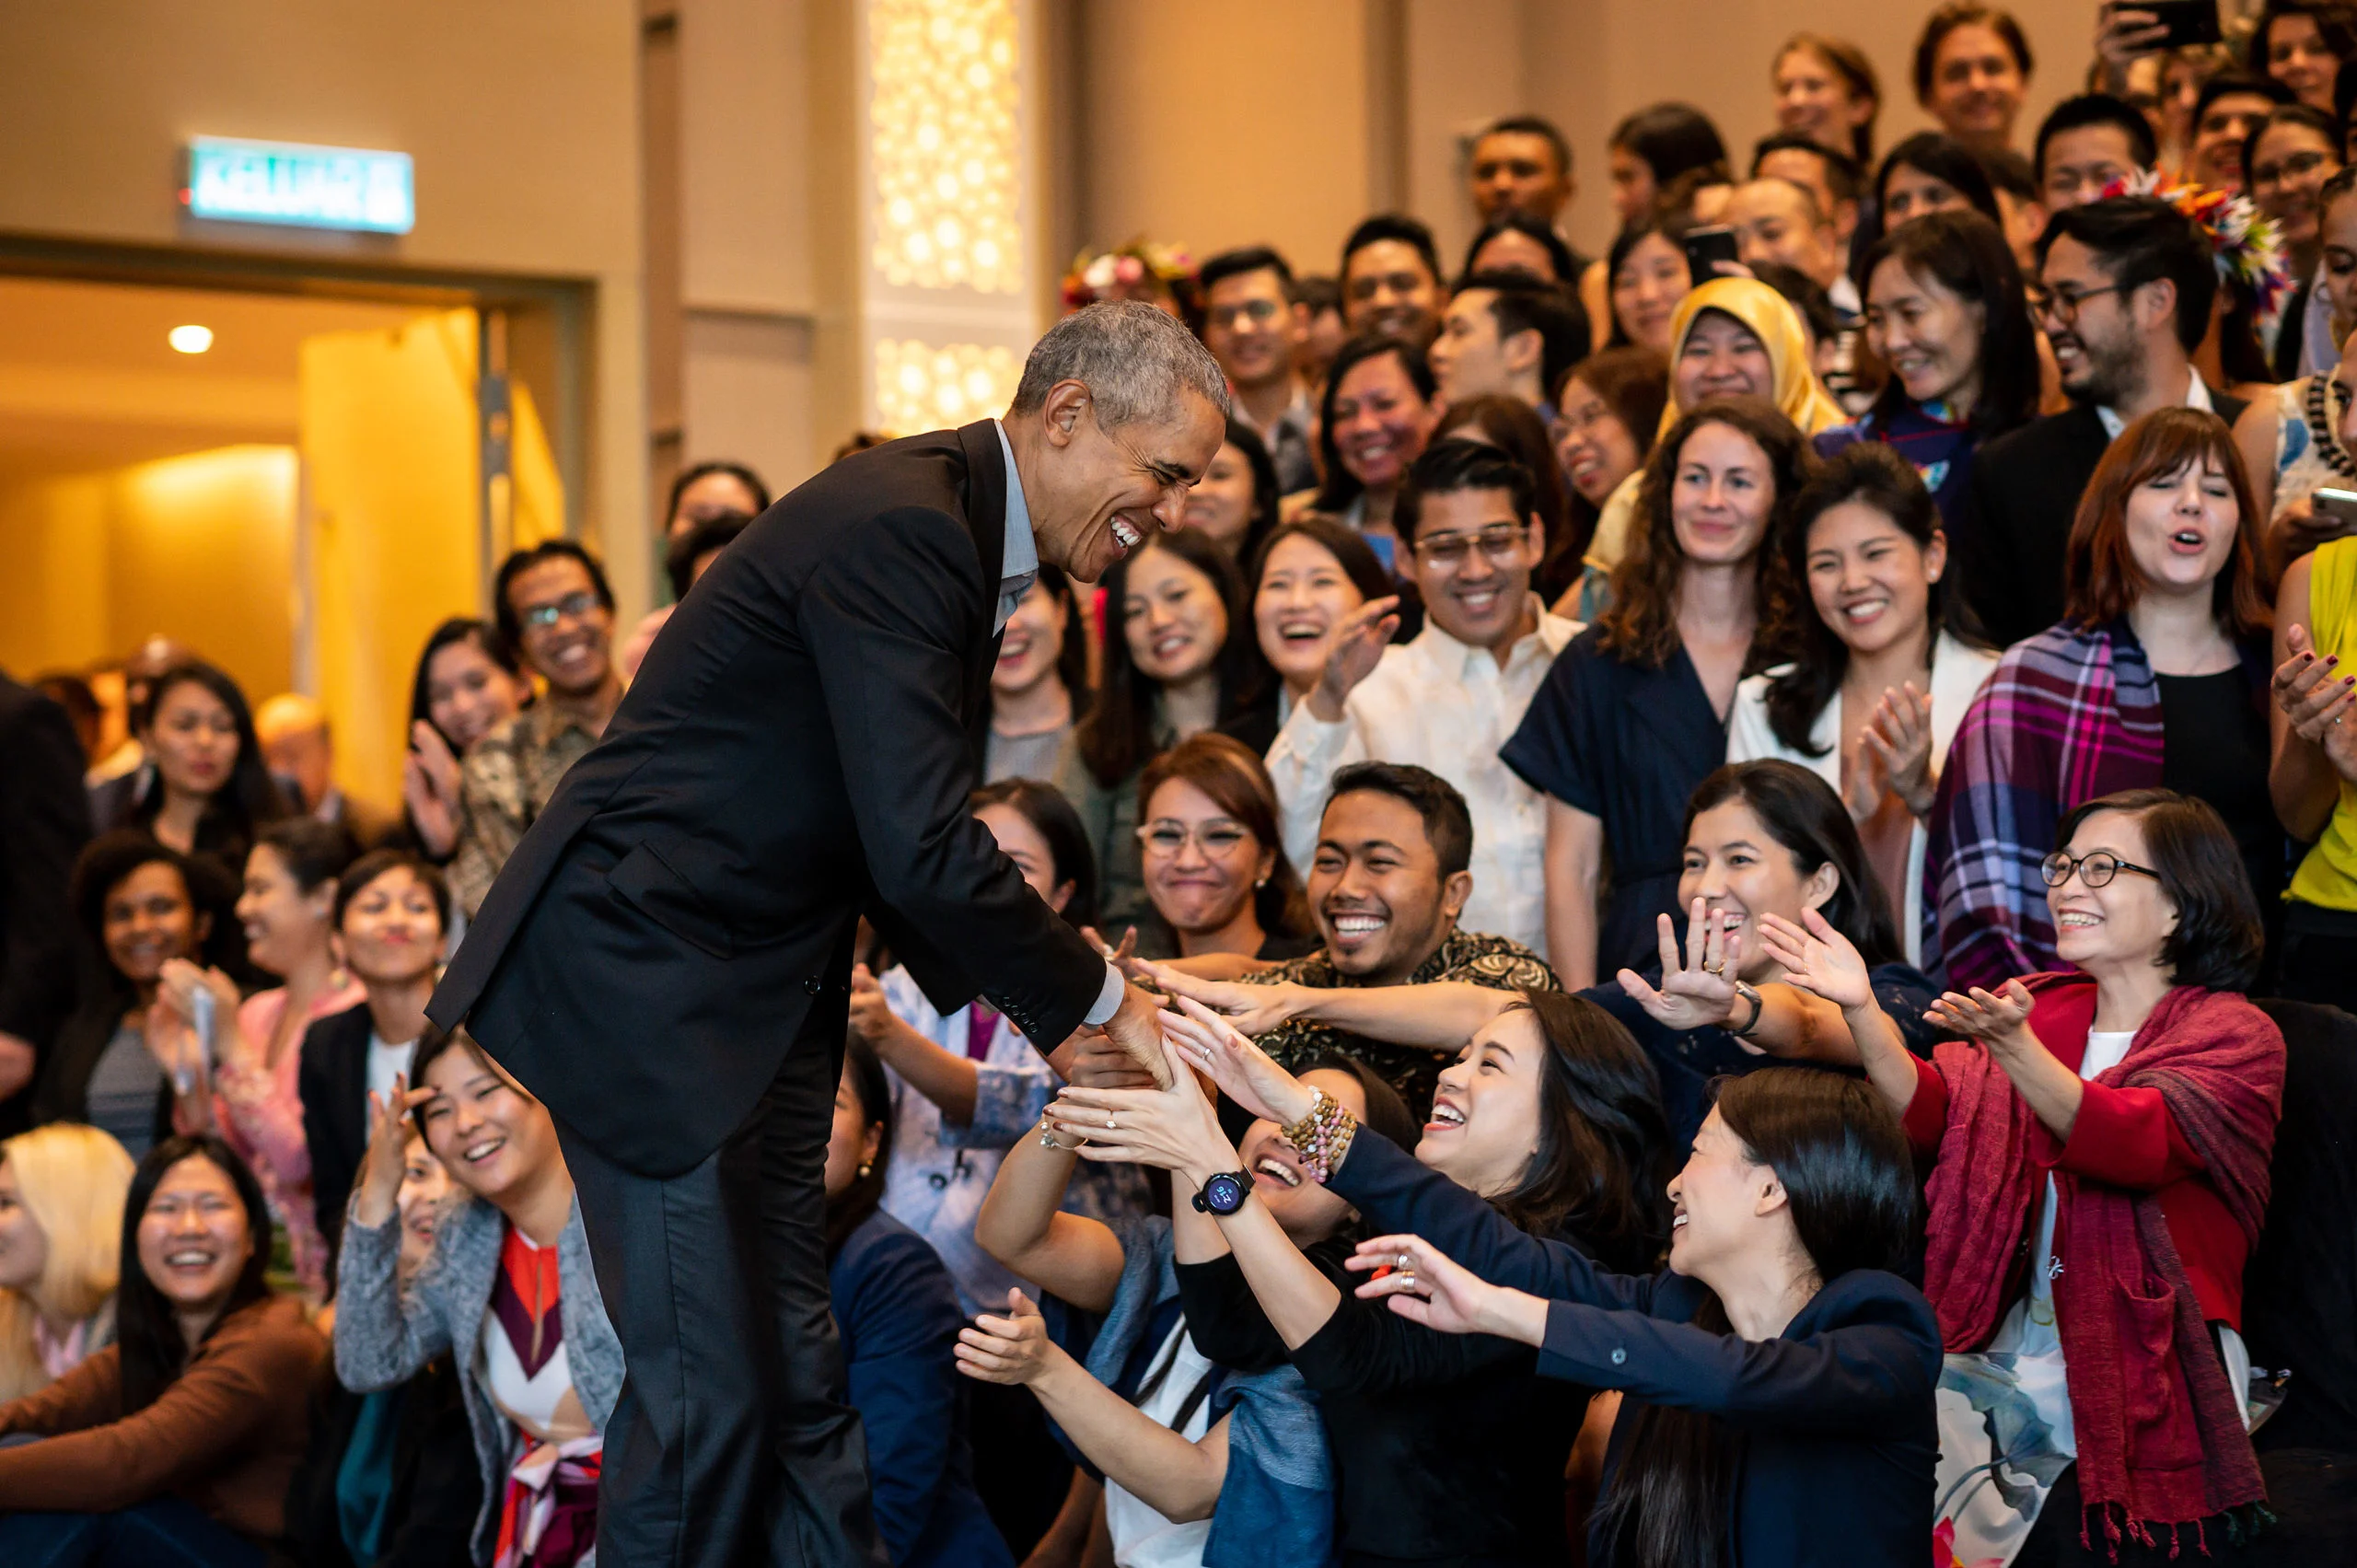 President Obama smiles as he shakes hands with an excited crowd of young people extend their hands. They have a range of light to medium skin tones. 